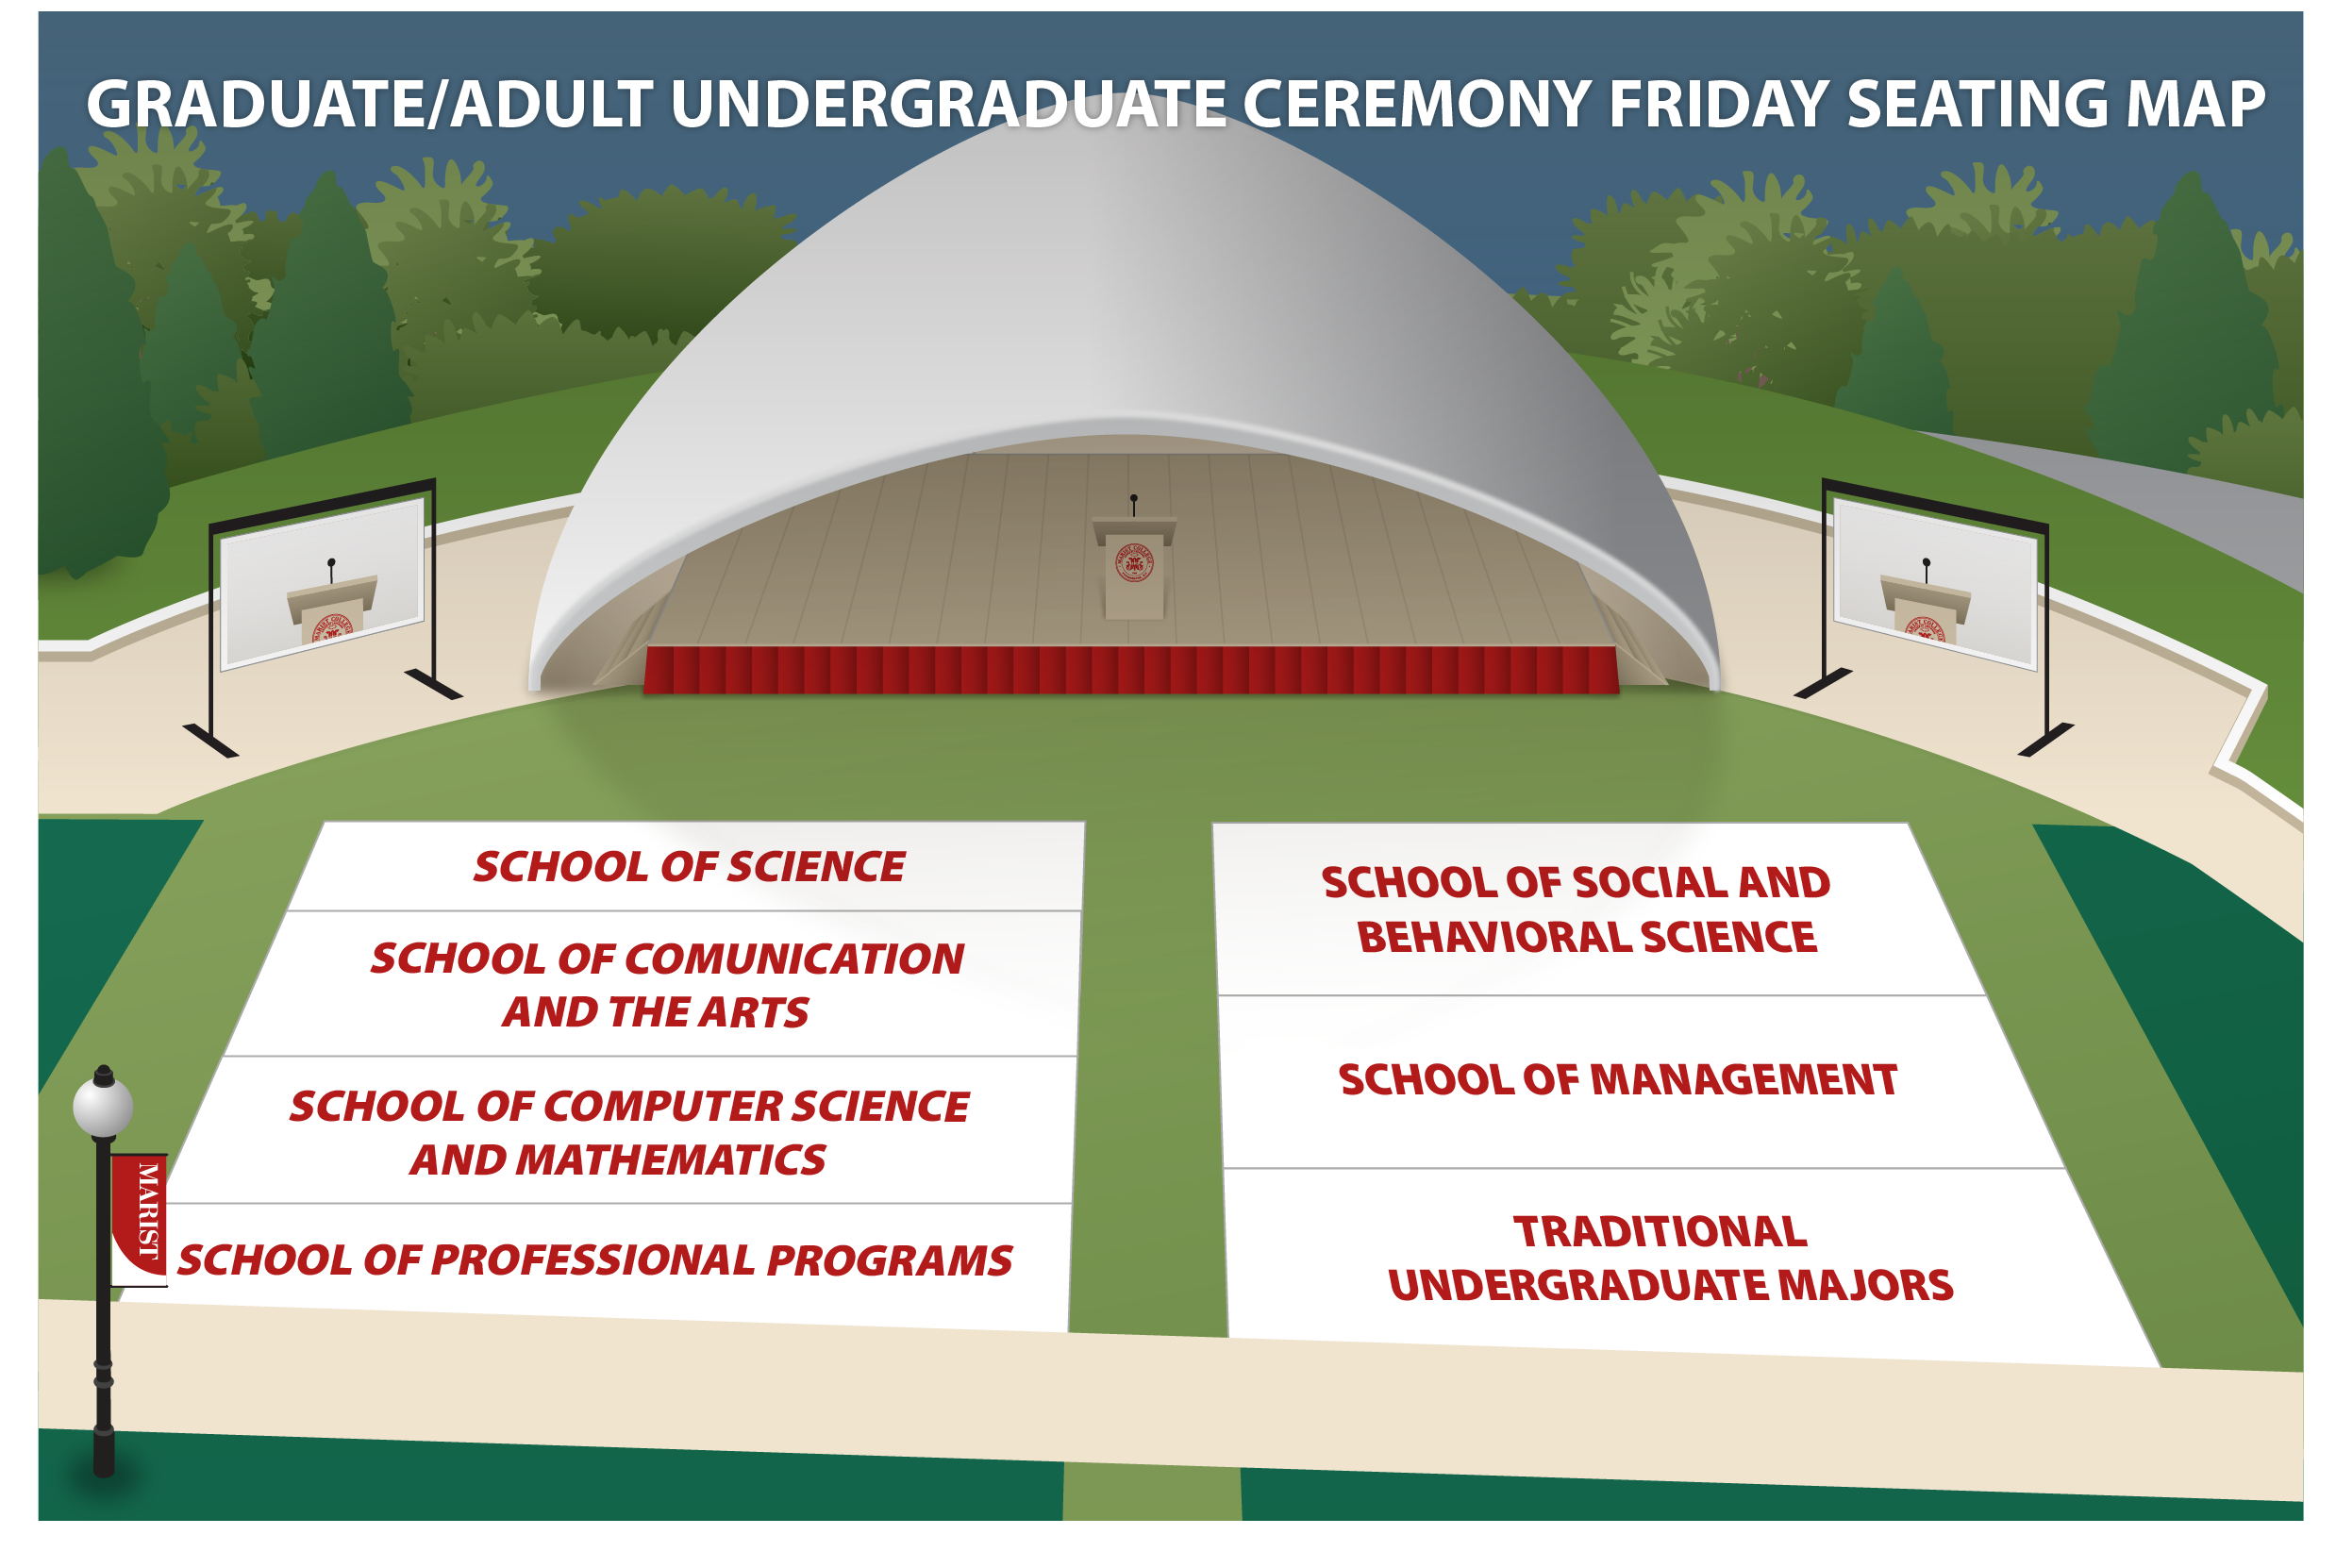 Image of the commencement seating map for Friday's ceremony.